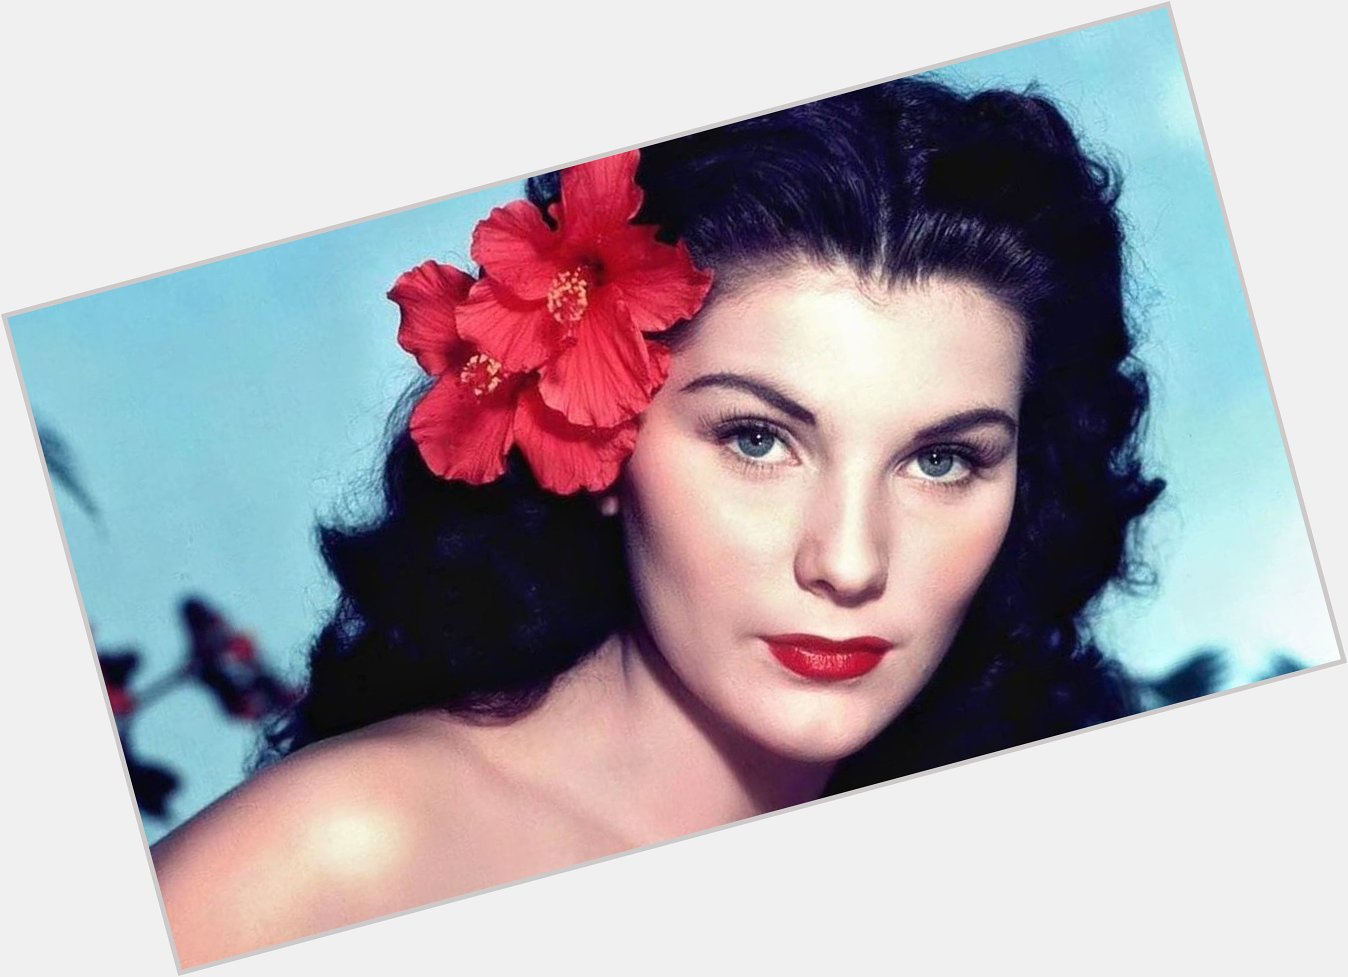 August 19, 2020
Happy birthday to American actress Debra Paget 87 years old. 